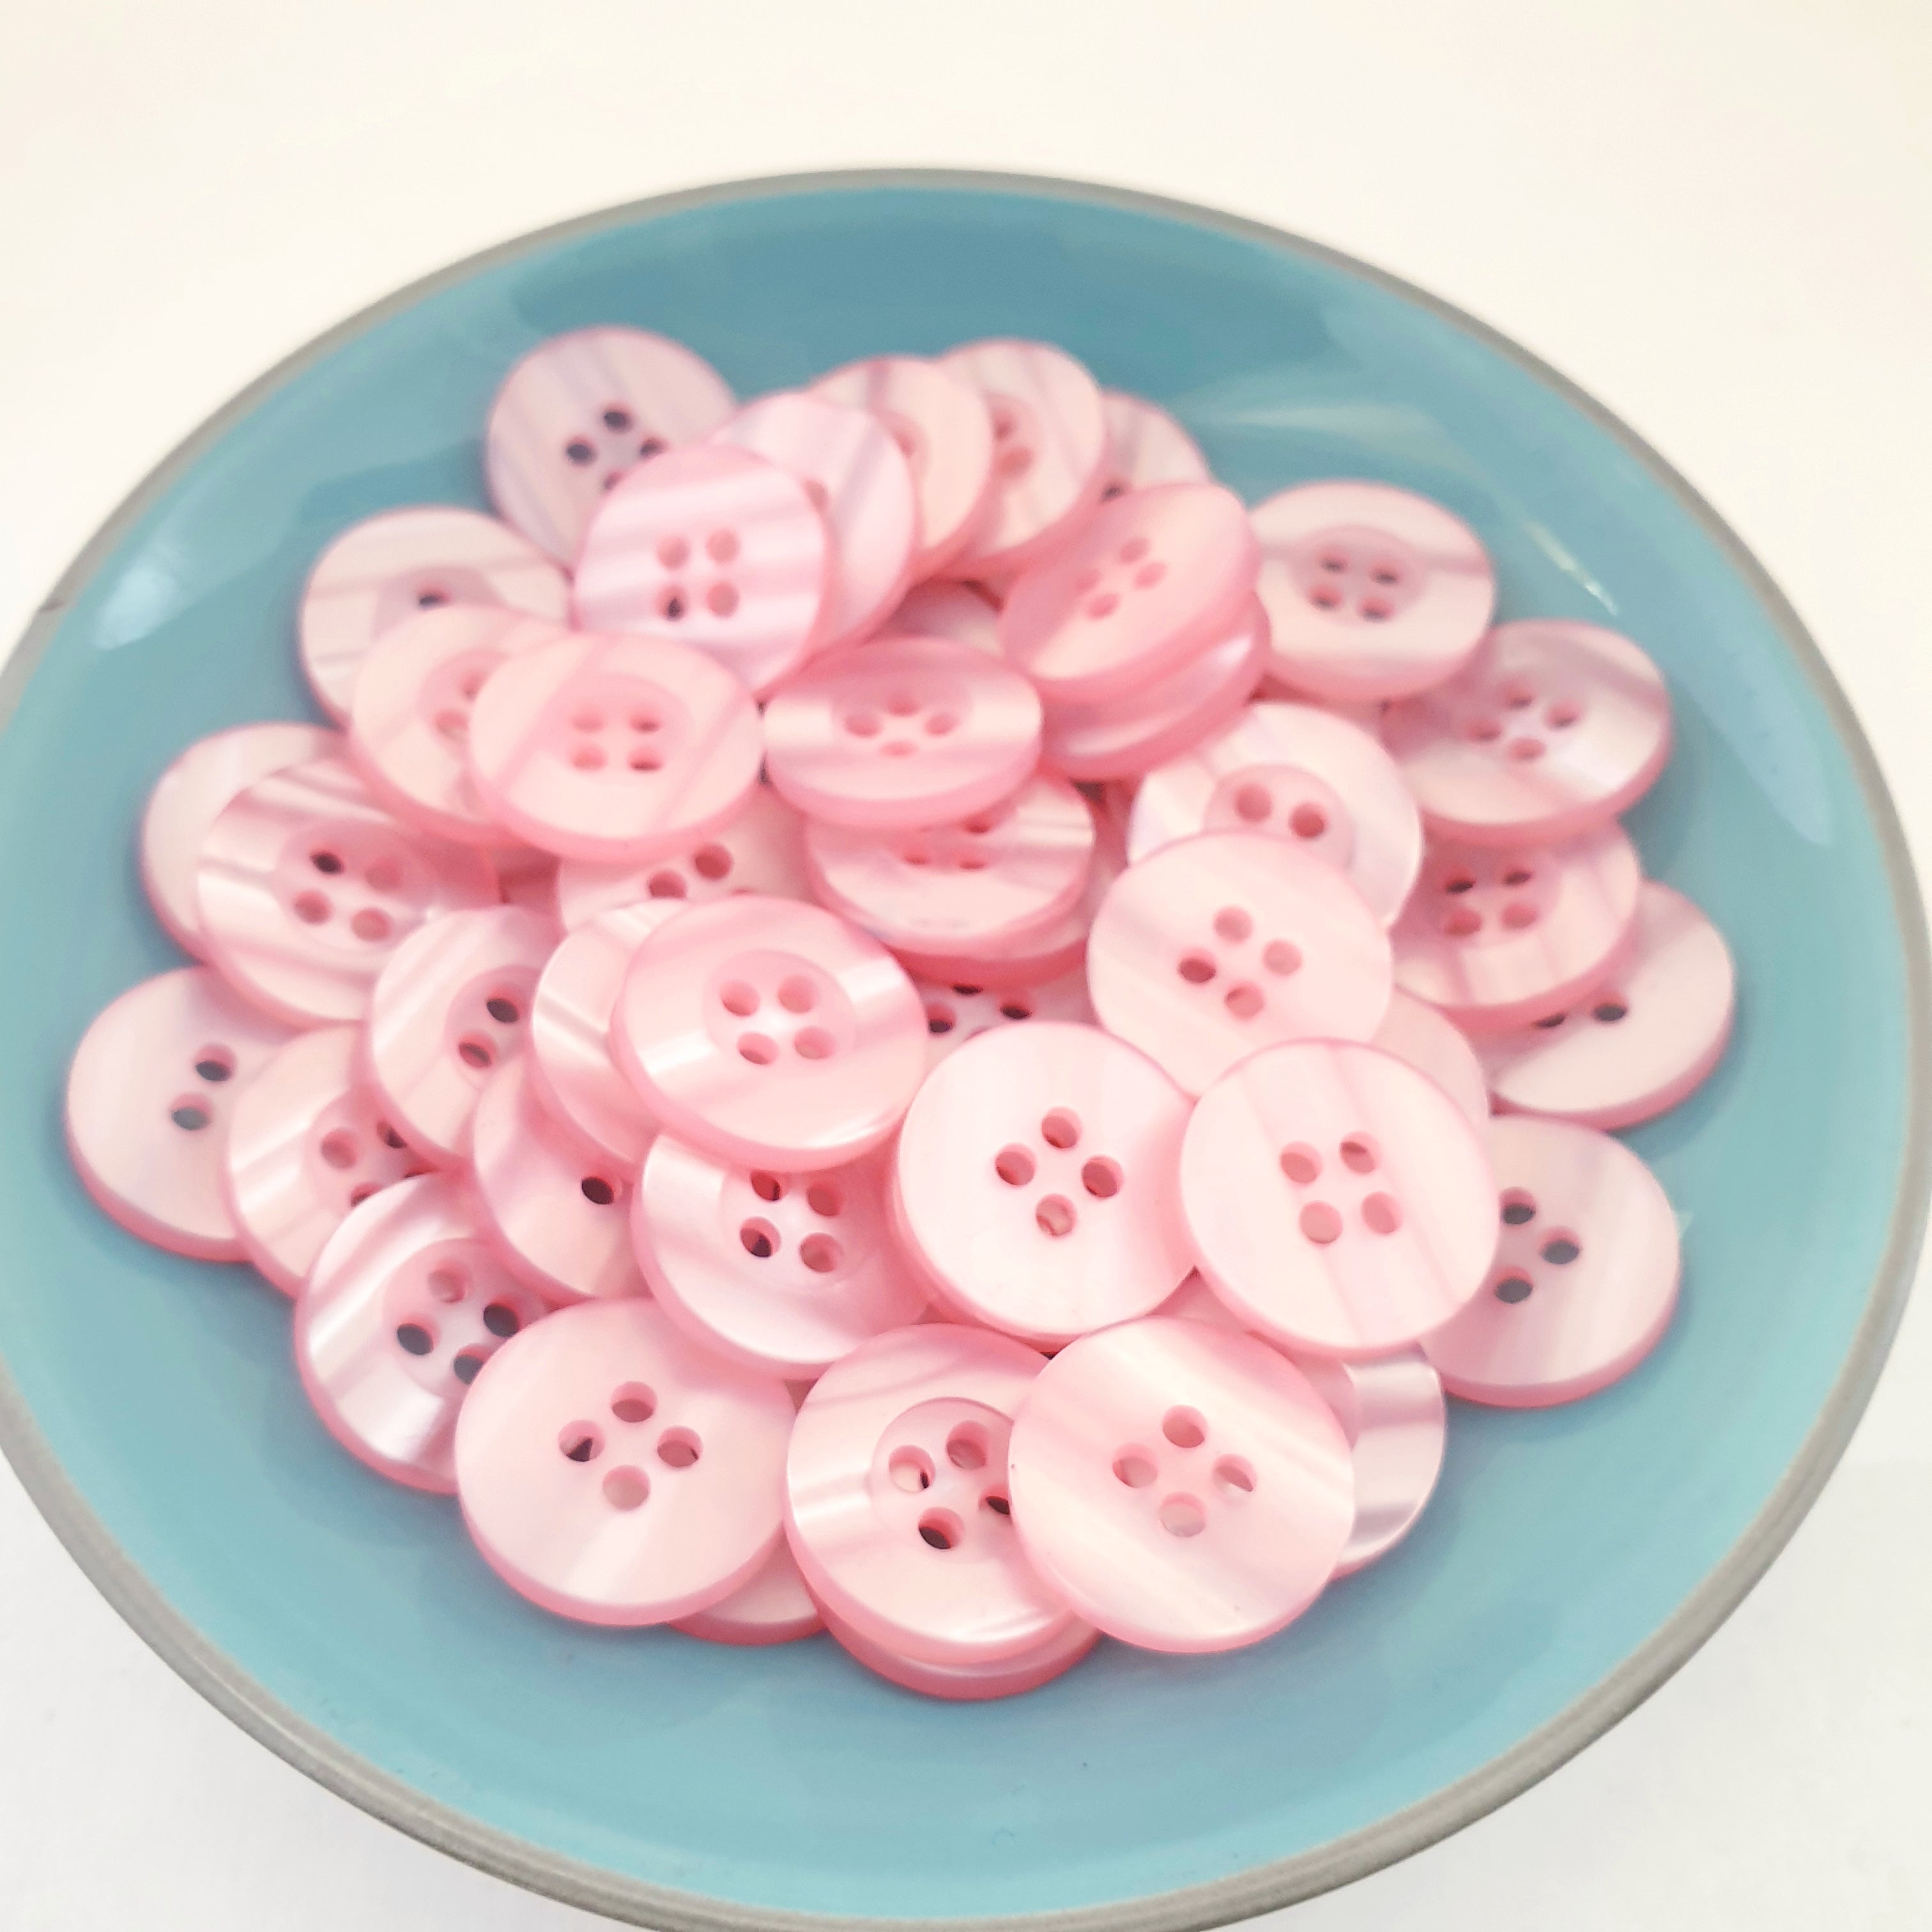 MajorCrafts 50pcs 15mm Baby Pink Pearlescent 4 Holes Round Resin Sewing Buttons